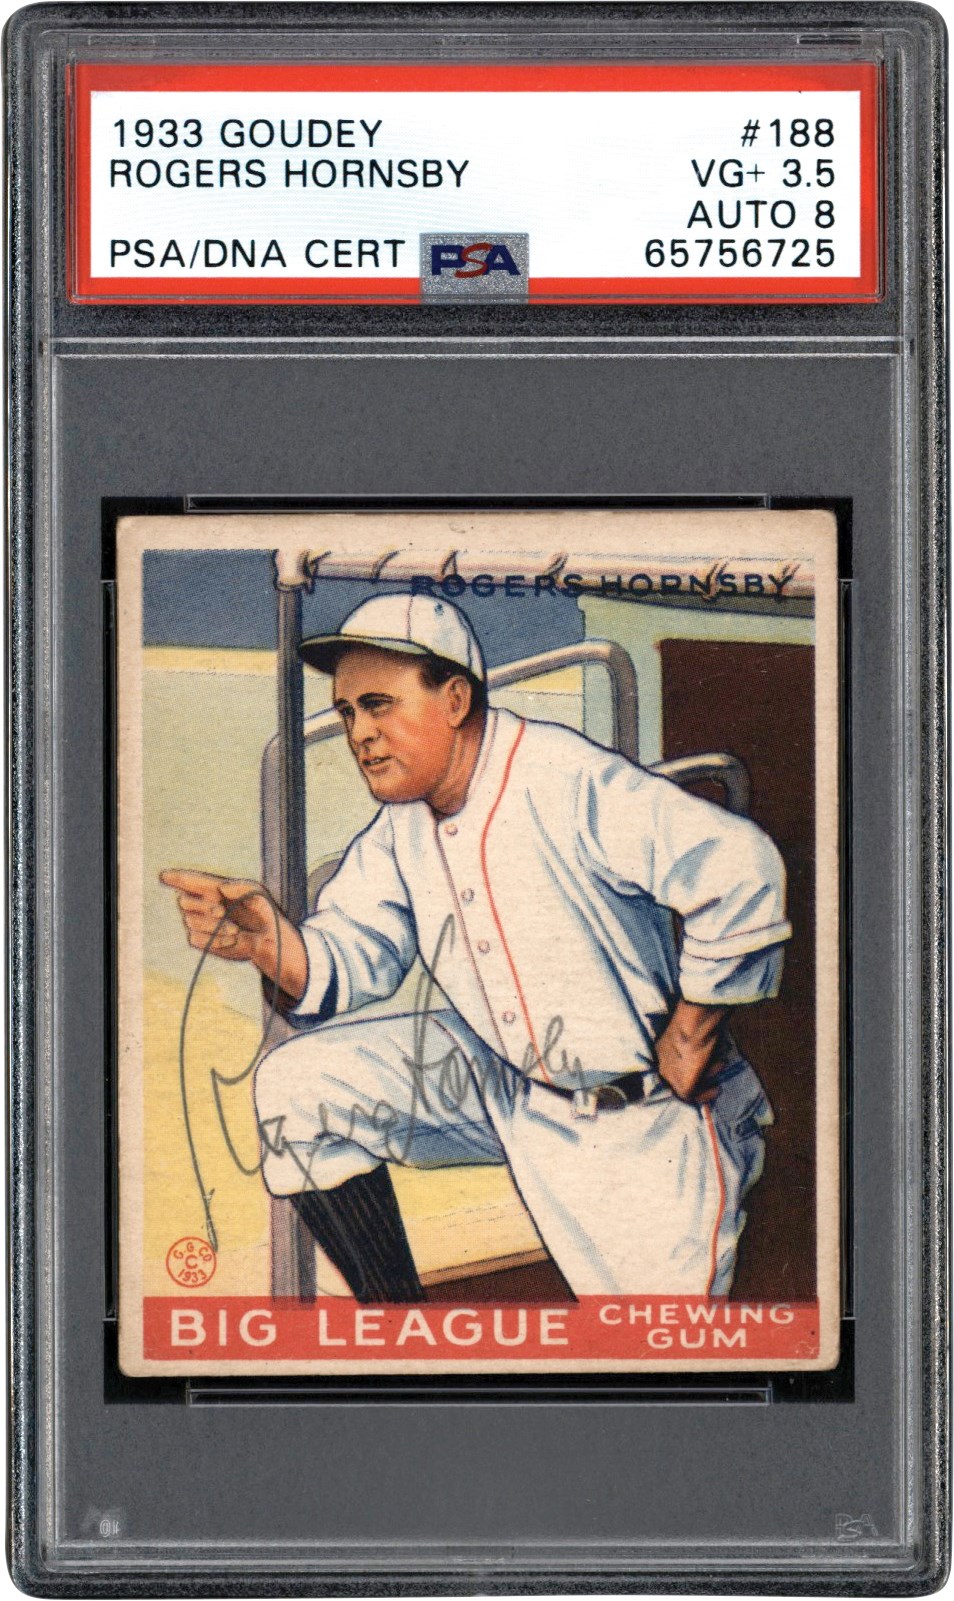 - Signed 1933 R319 Goudey #188 Rogers Hornsby PSA VG+ 3.5 Auto 8 (Pop 1 of 1 - One Higher)